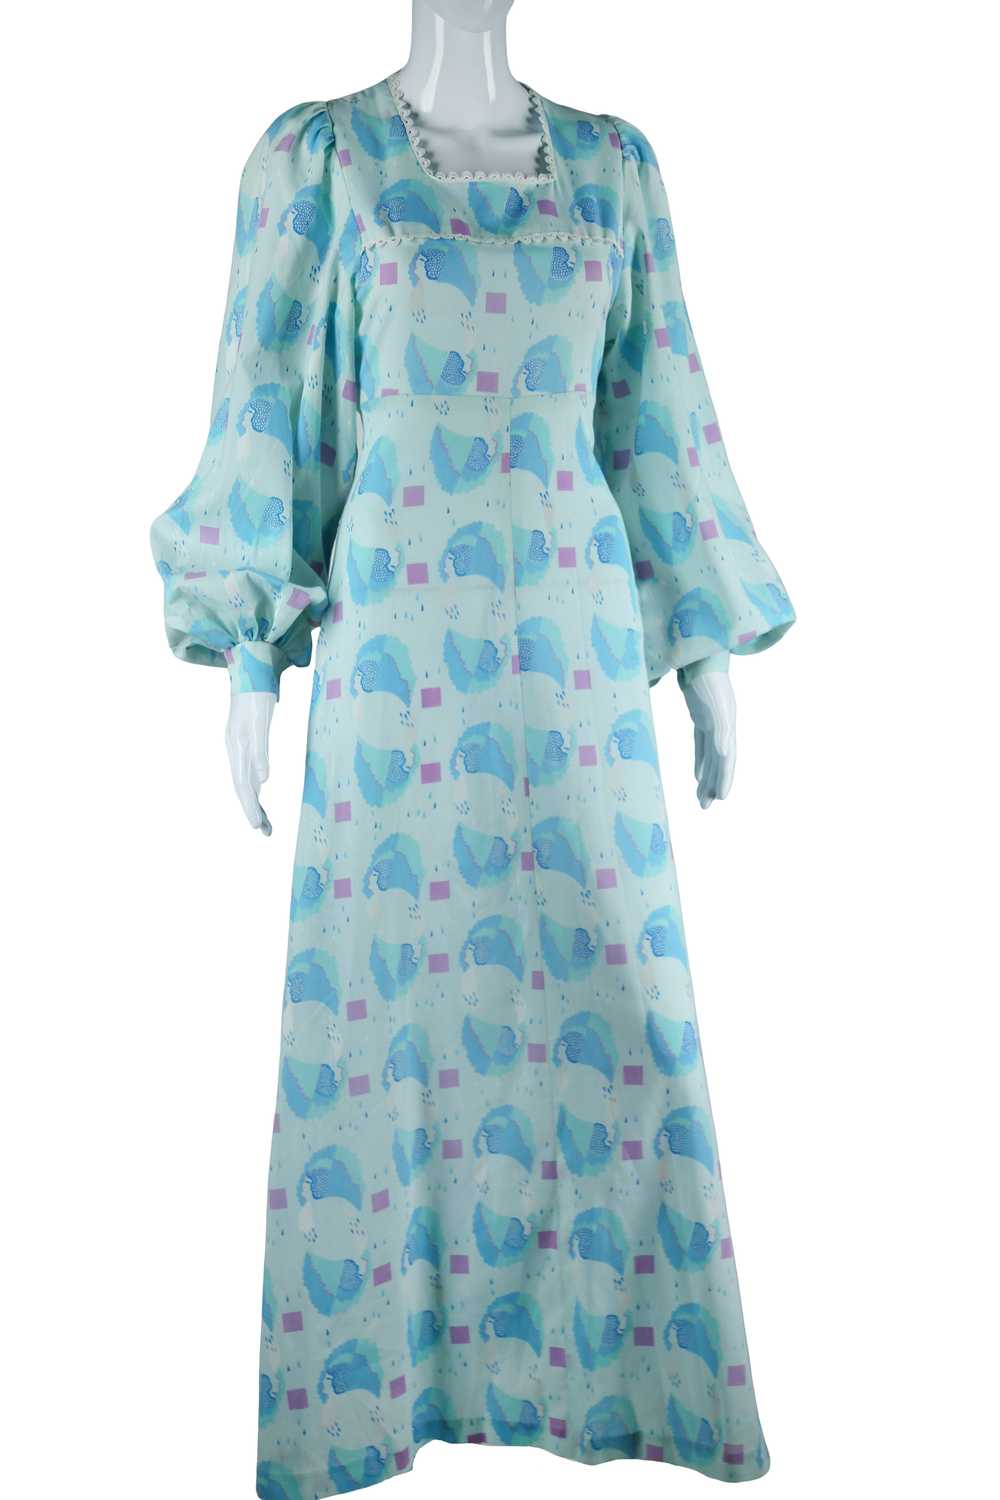 Raindrops and Faces in Profile Novelty Print Maxi… - image 1